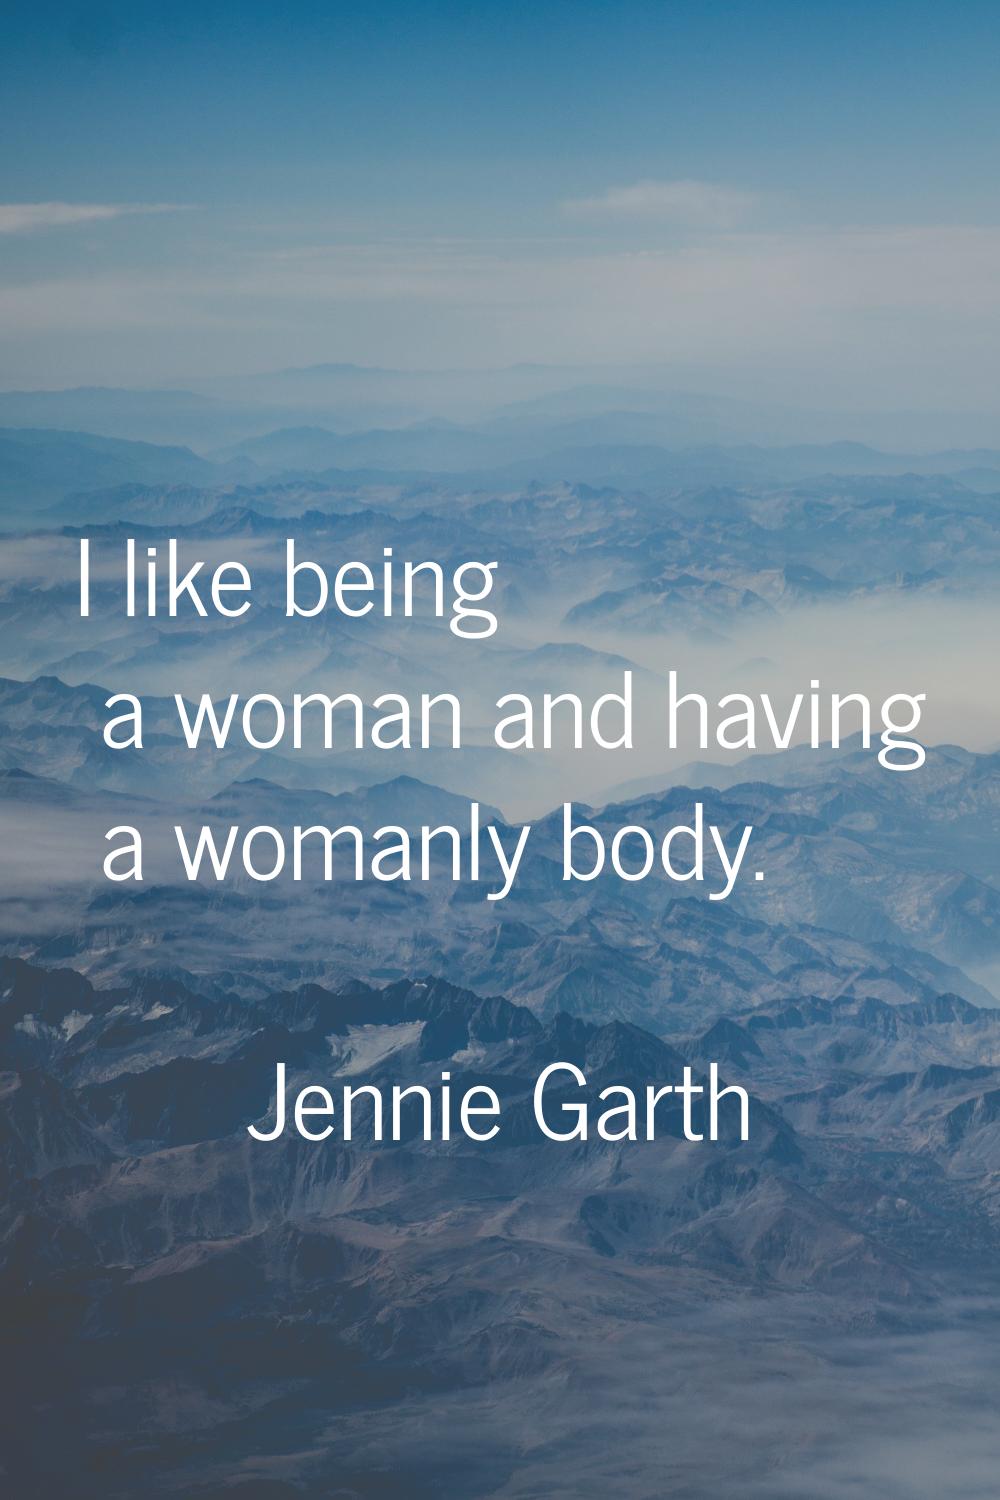 I like being a woman and having a womanly body.